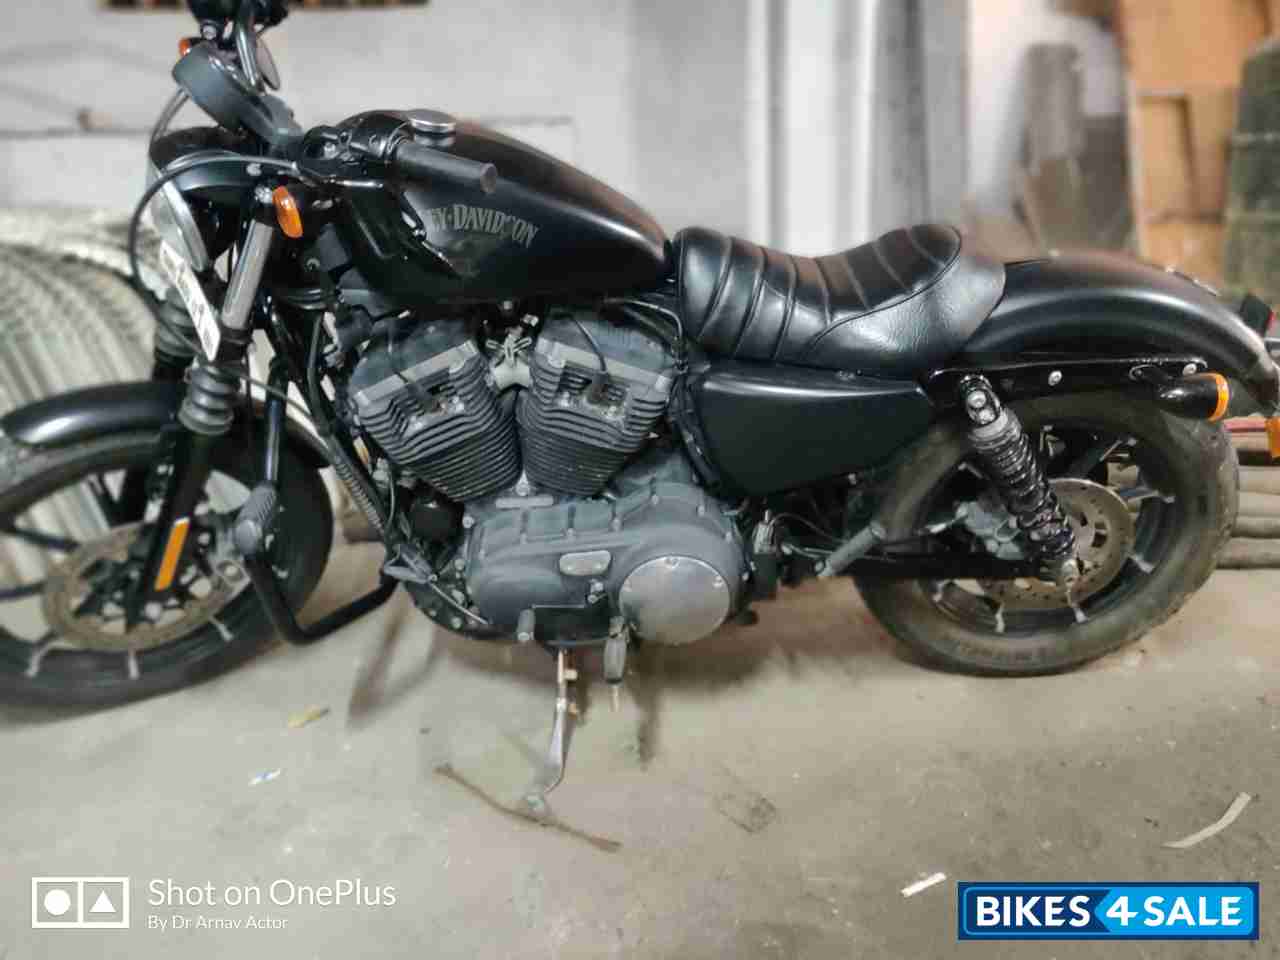 Used 2016 Model Harley Davidson Iron 883 For Sale In Chennai Id 237337 Bikes4sale